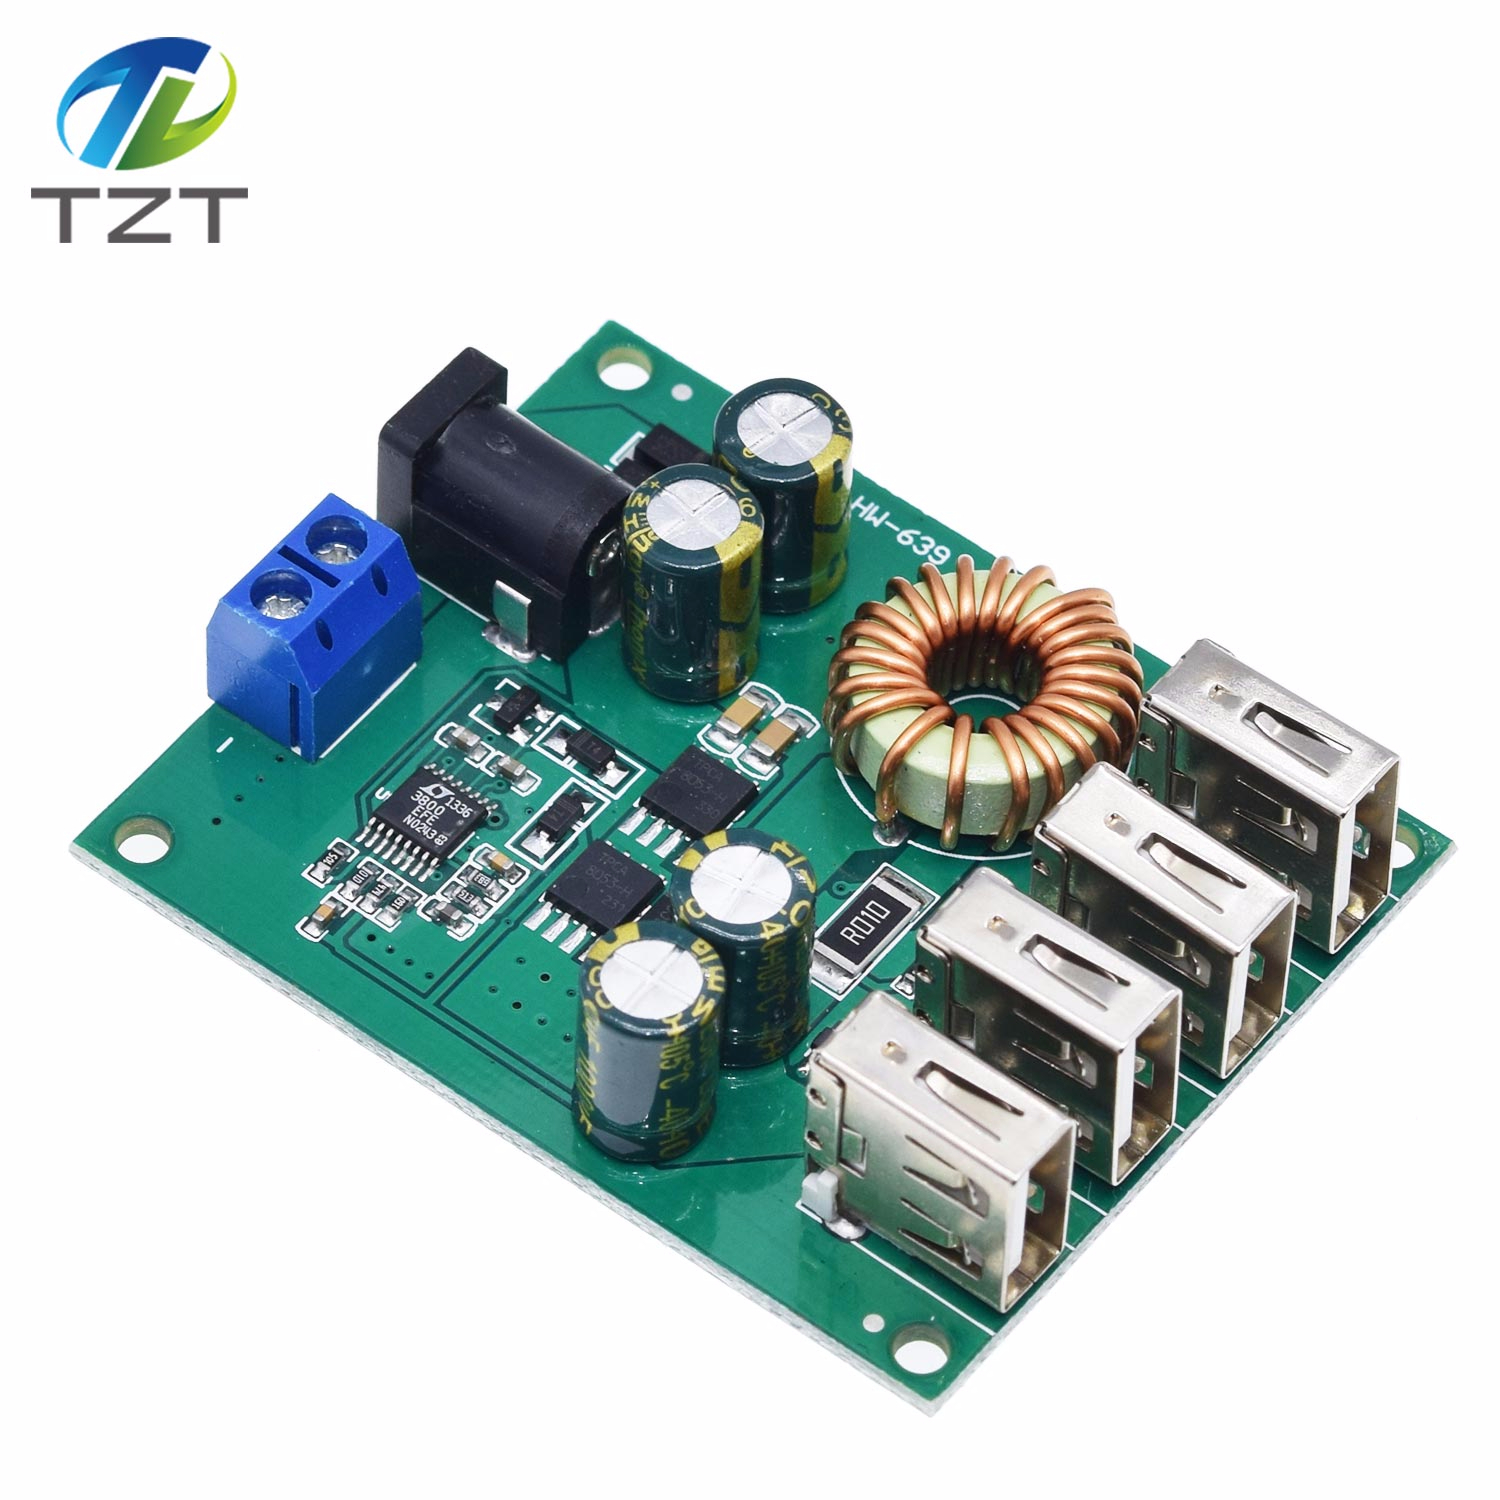 TZT DC DC 7V-60V to 5V 5A 4 Four USB Output Buck Converter Board Step Down Power Supply Module Car Charger High Speed